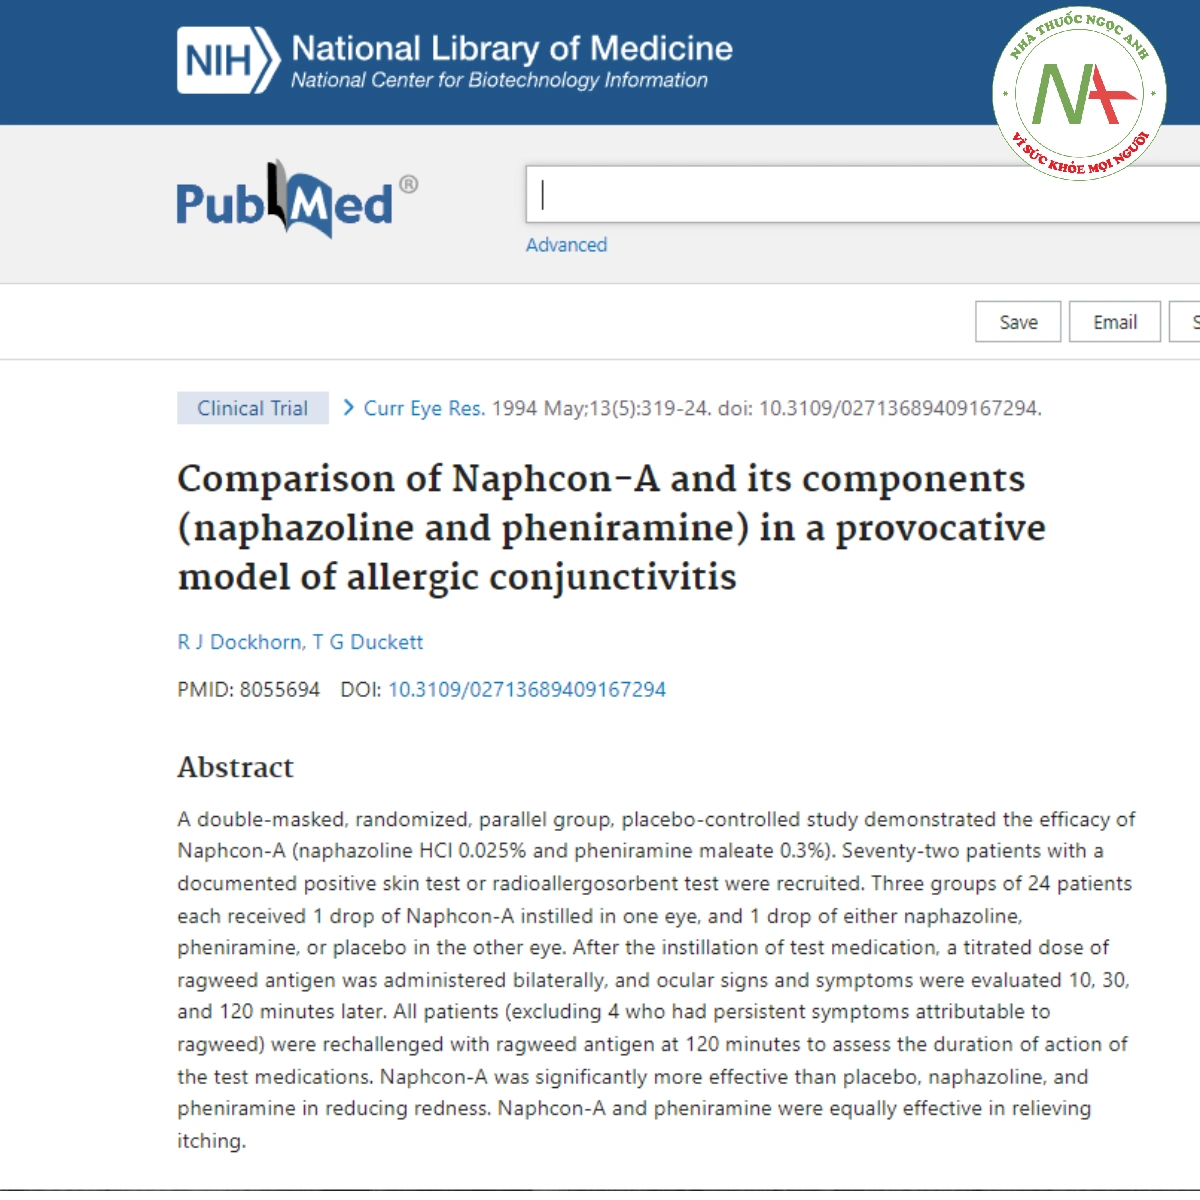 Comparison of Naphcon-A and its components (naphazoline and pheniramine) in a provocative model of allergic conjunctivitis